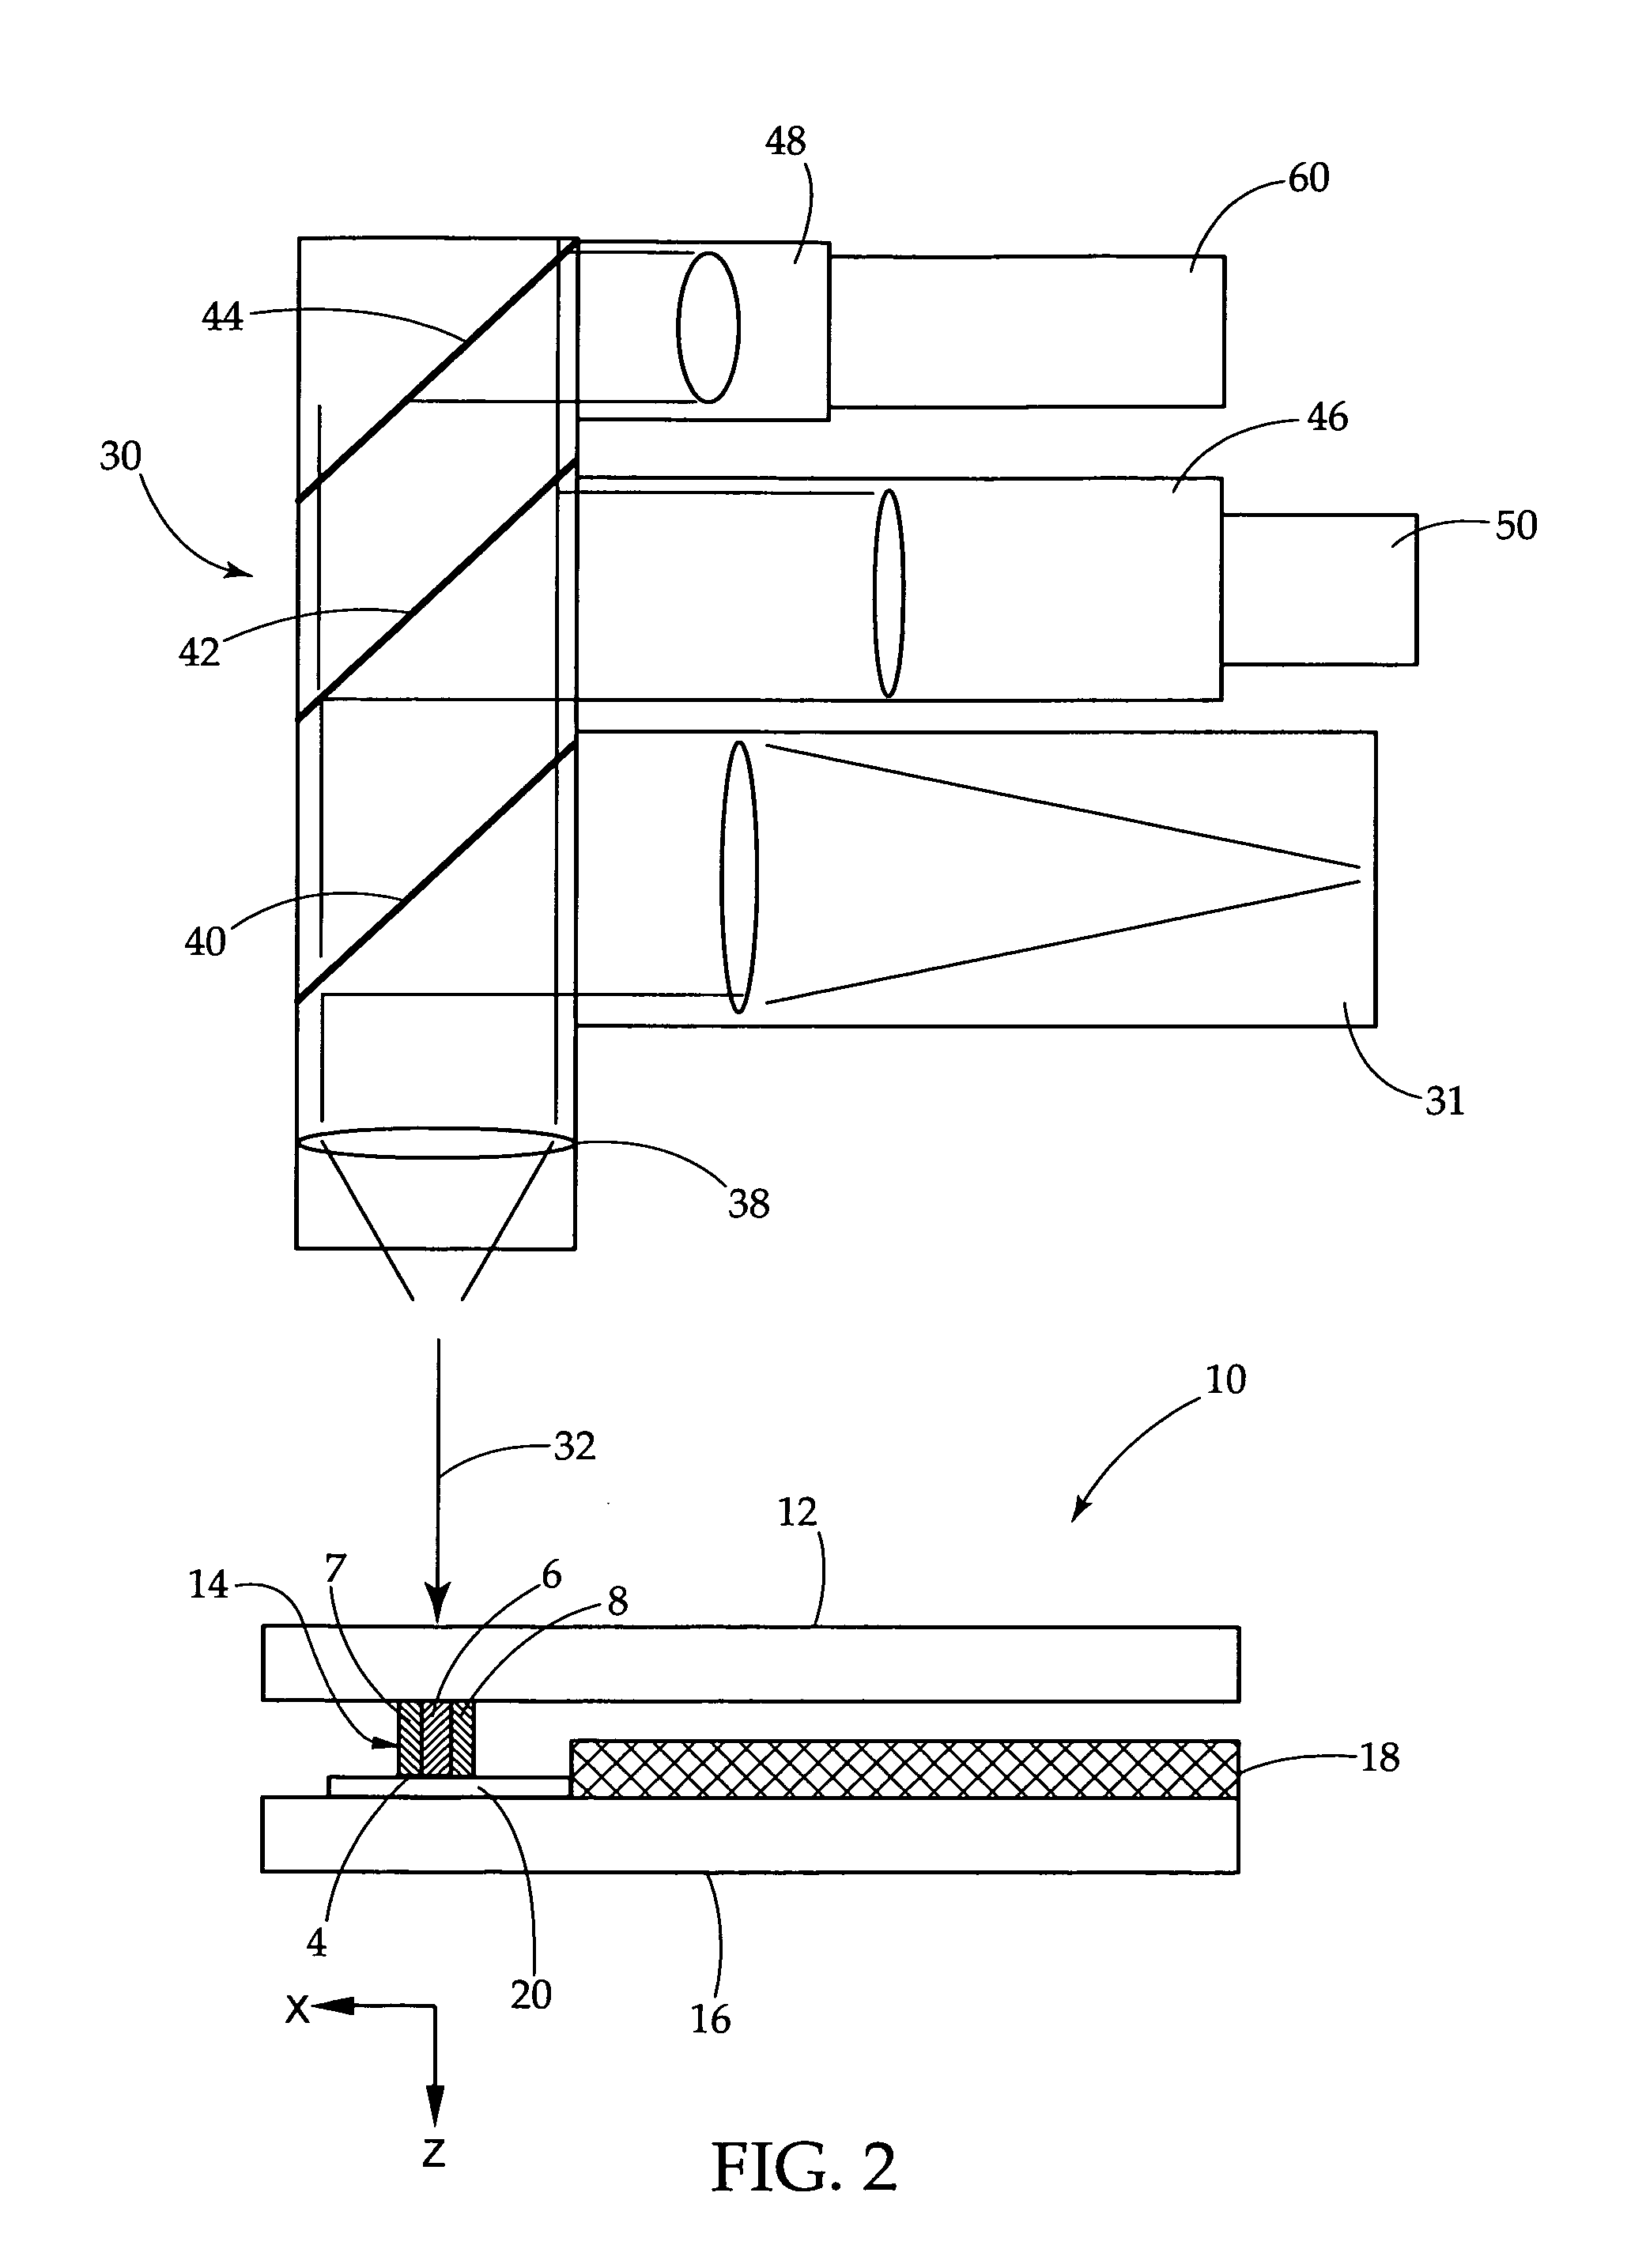 Glass packages and methods of controlling laser beam characteristics for sealing them